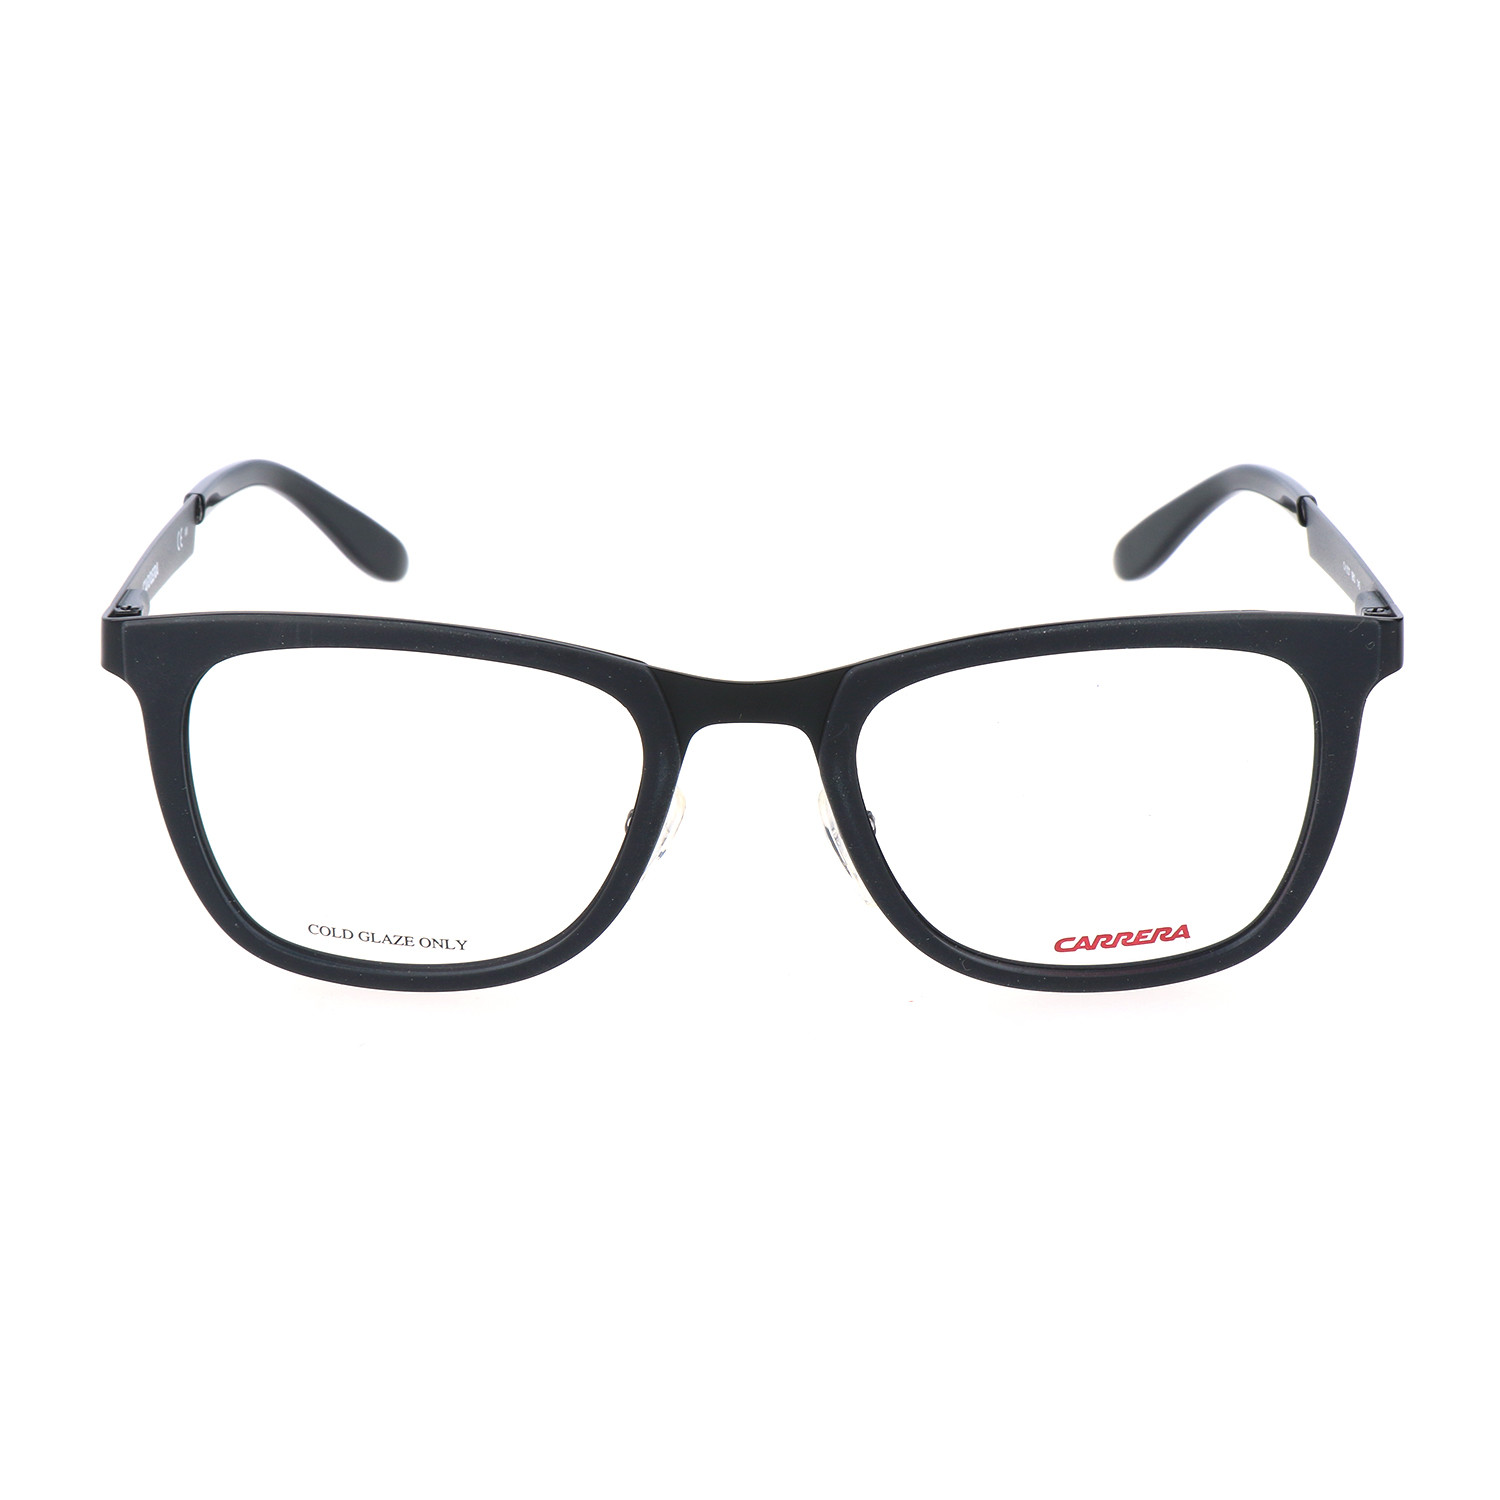 Neptune Frame // Matte Black - Clearance: Fashion Accessories - Touch ...